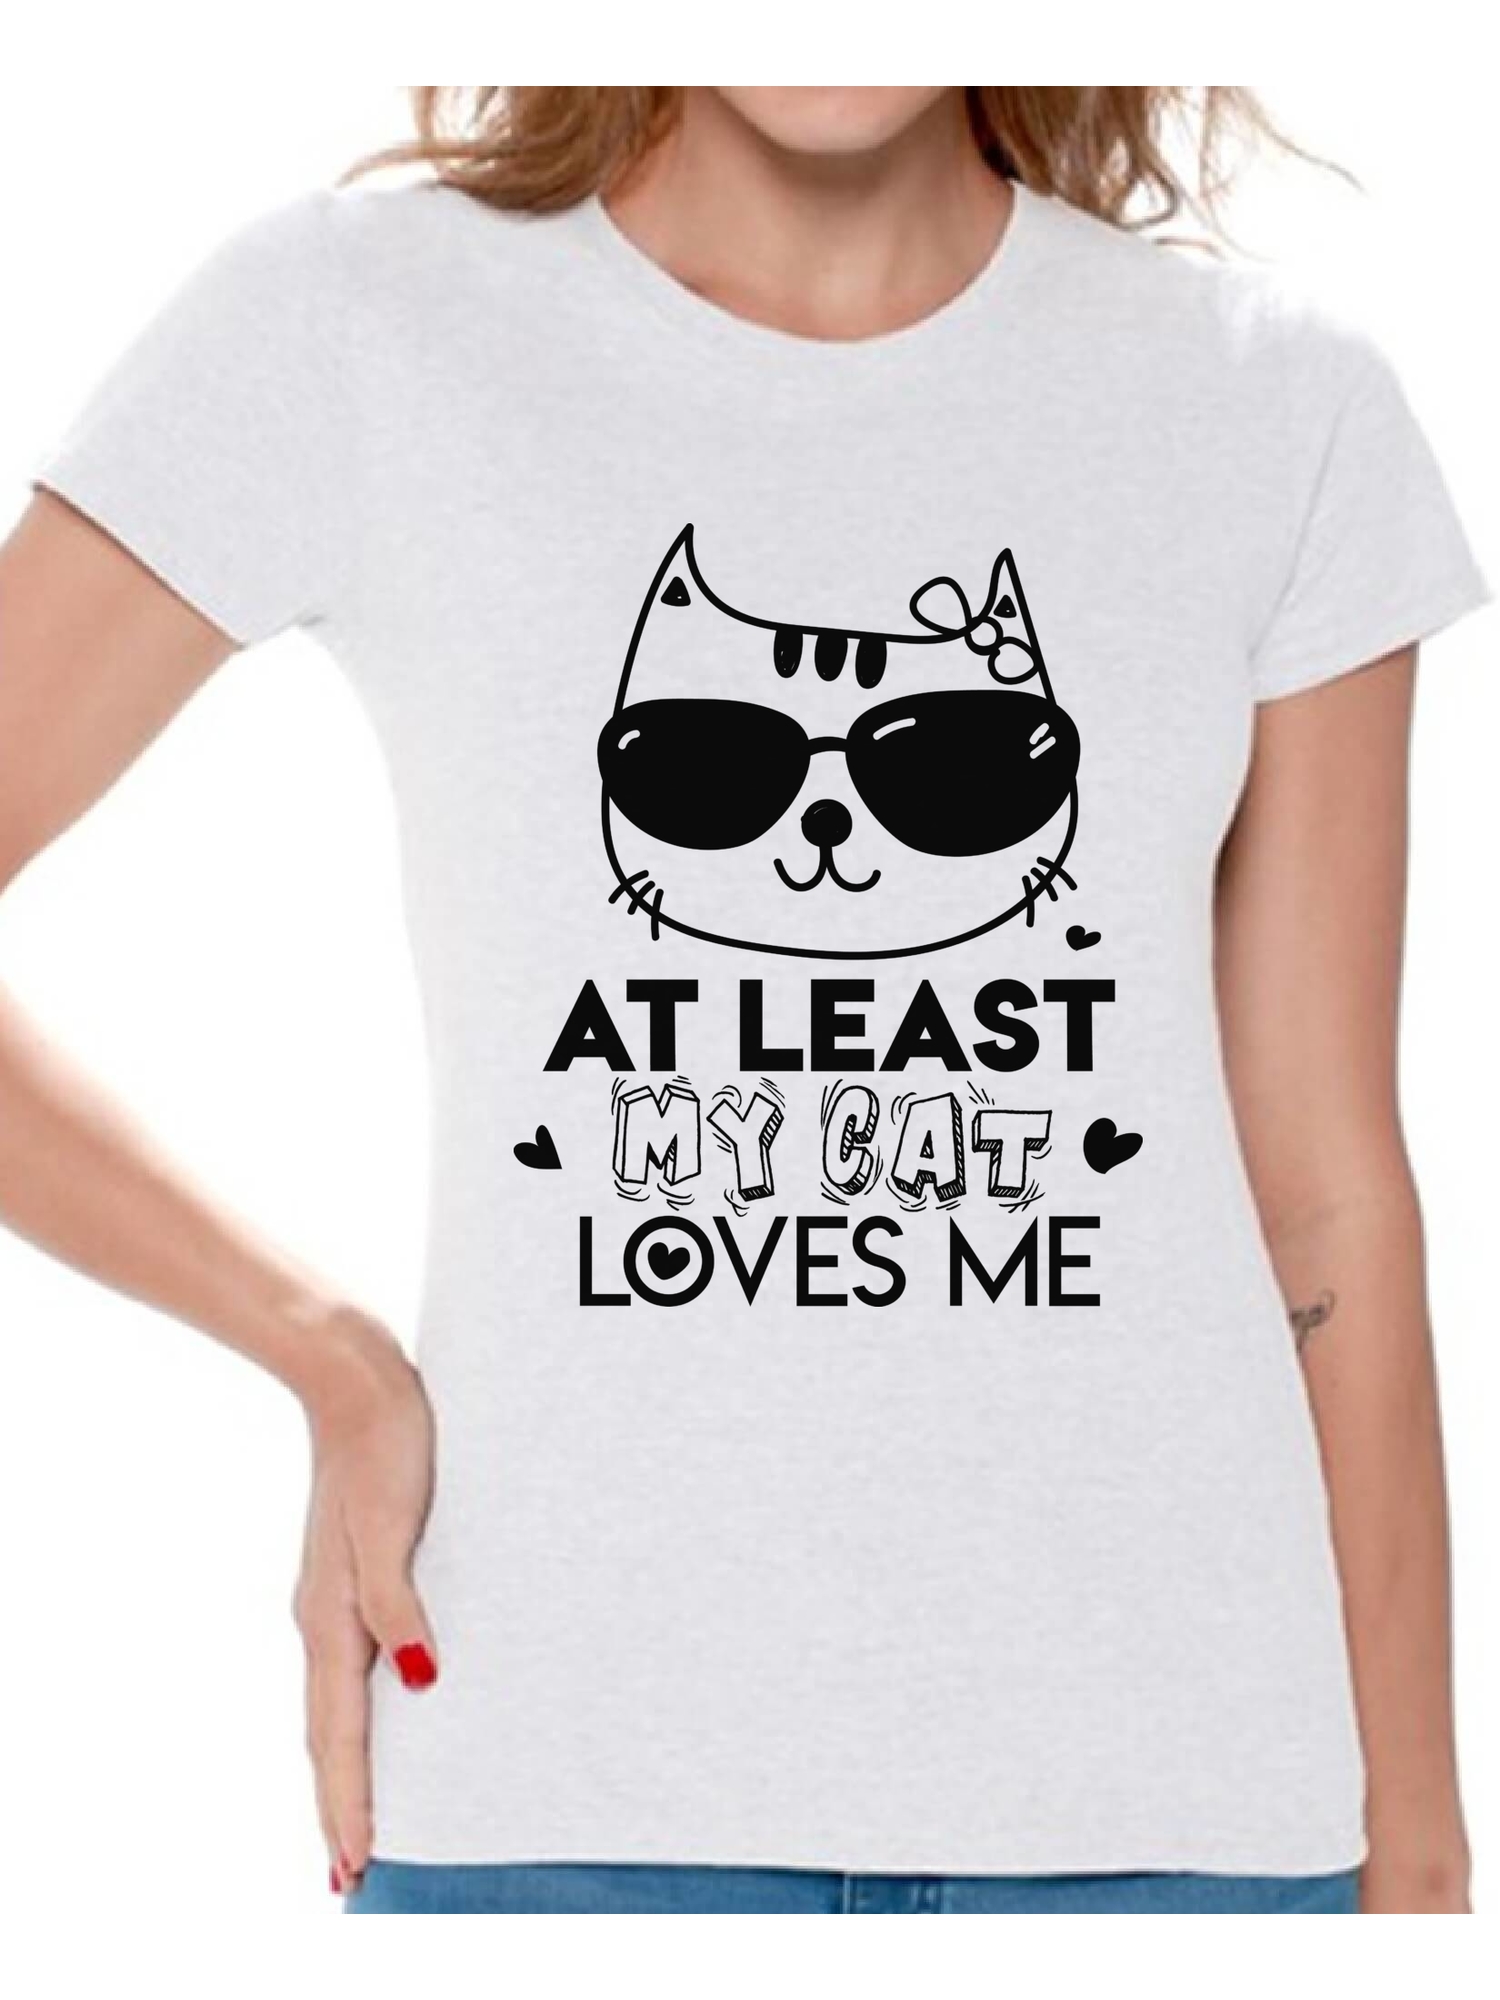 Awkward Styles At Least My Cat Loves Me Shirt Valentine's Day T Shirt for Women Valentines Day Gift Idea for Her Cat Lovers Shirt Cute Cat Valentine Tshirt Valentines Day Single Funny Valentine Shirt - image 1 of 4